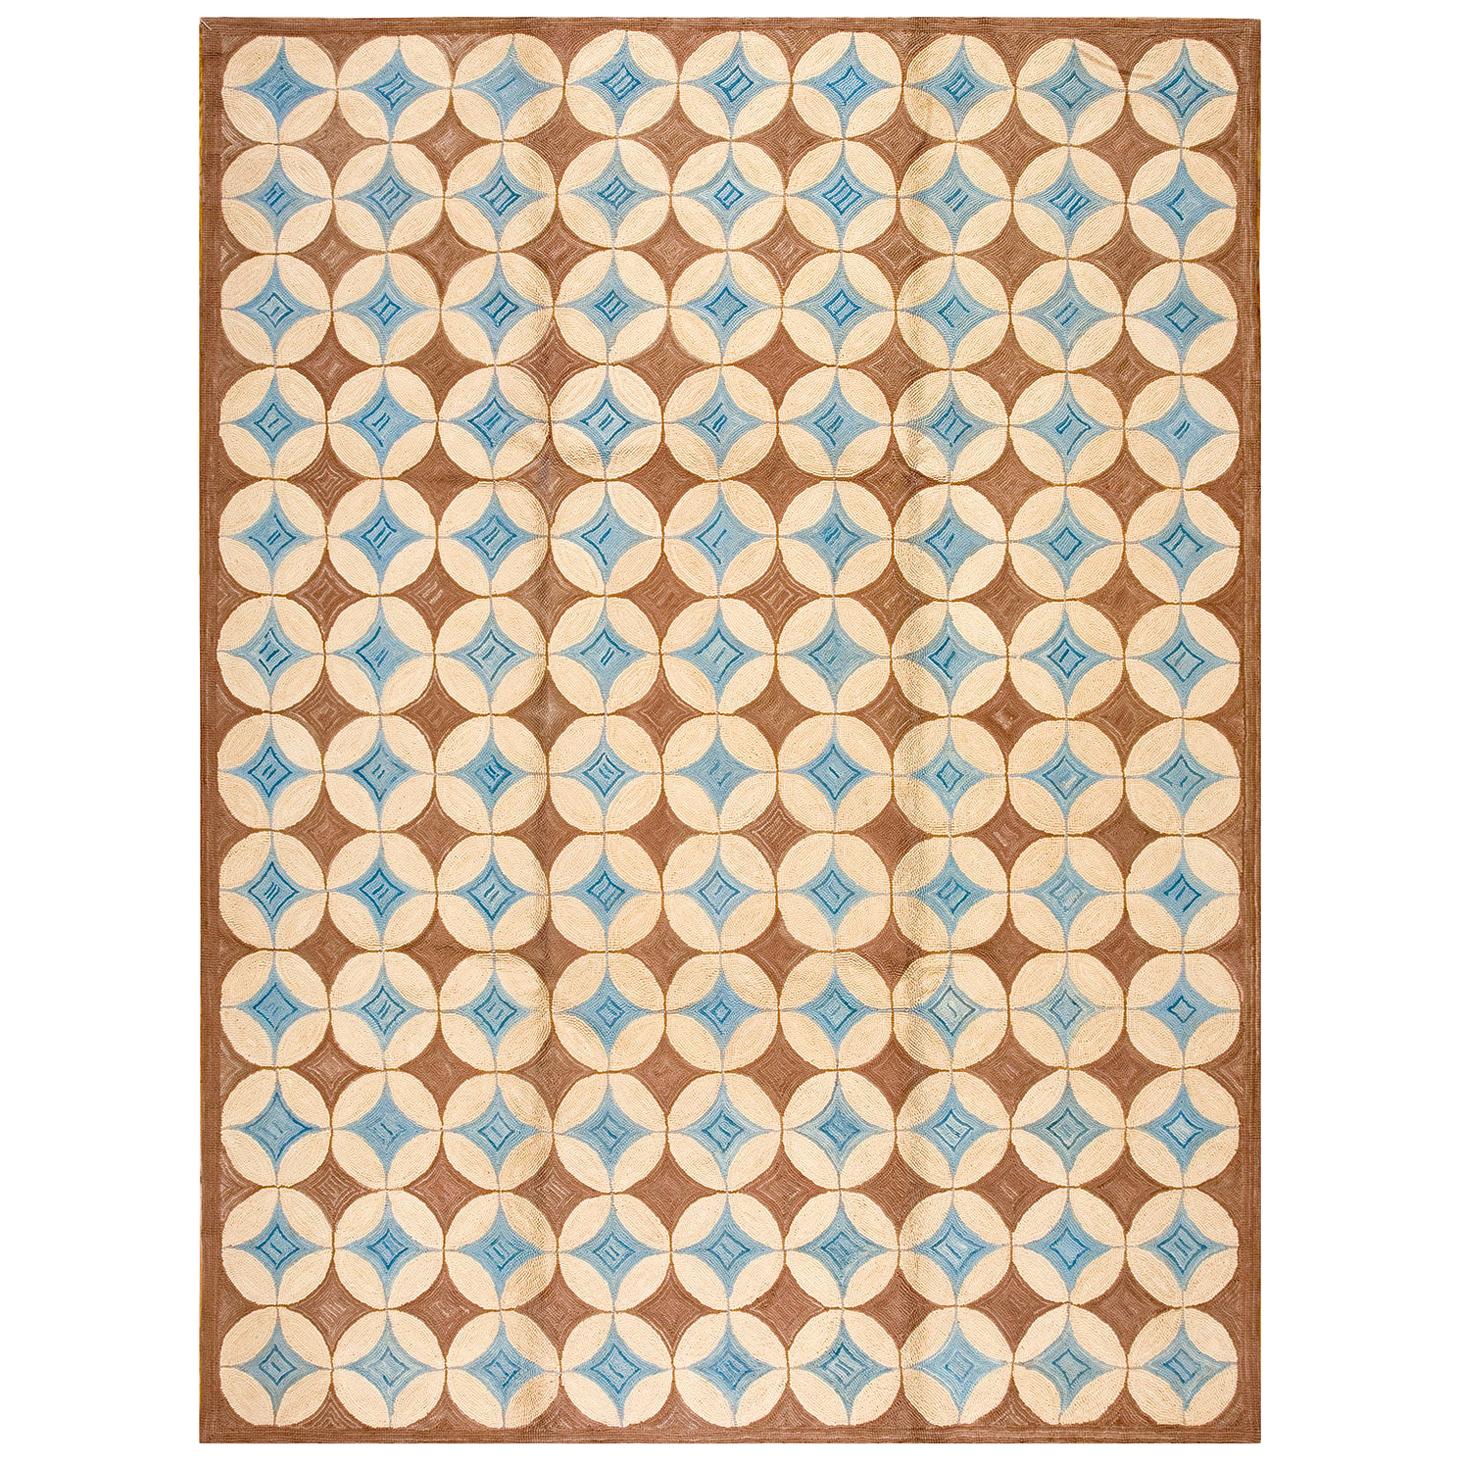 Contemporary Hooked Rug (8' x 10' - 244x 305)